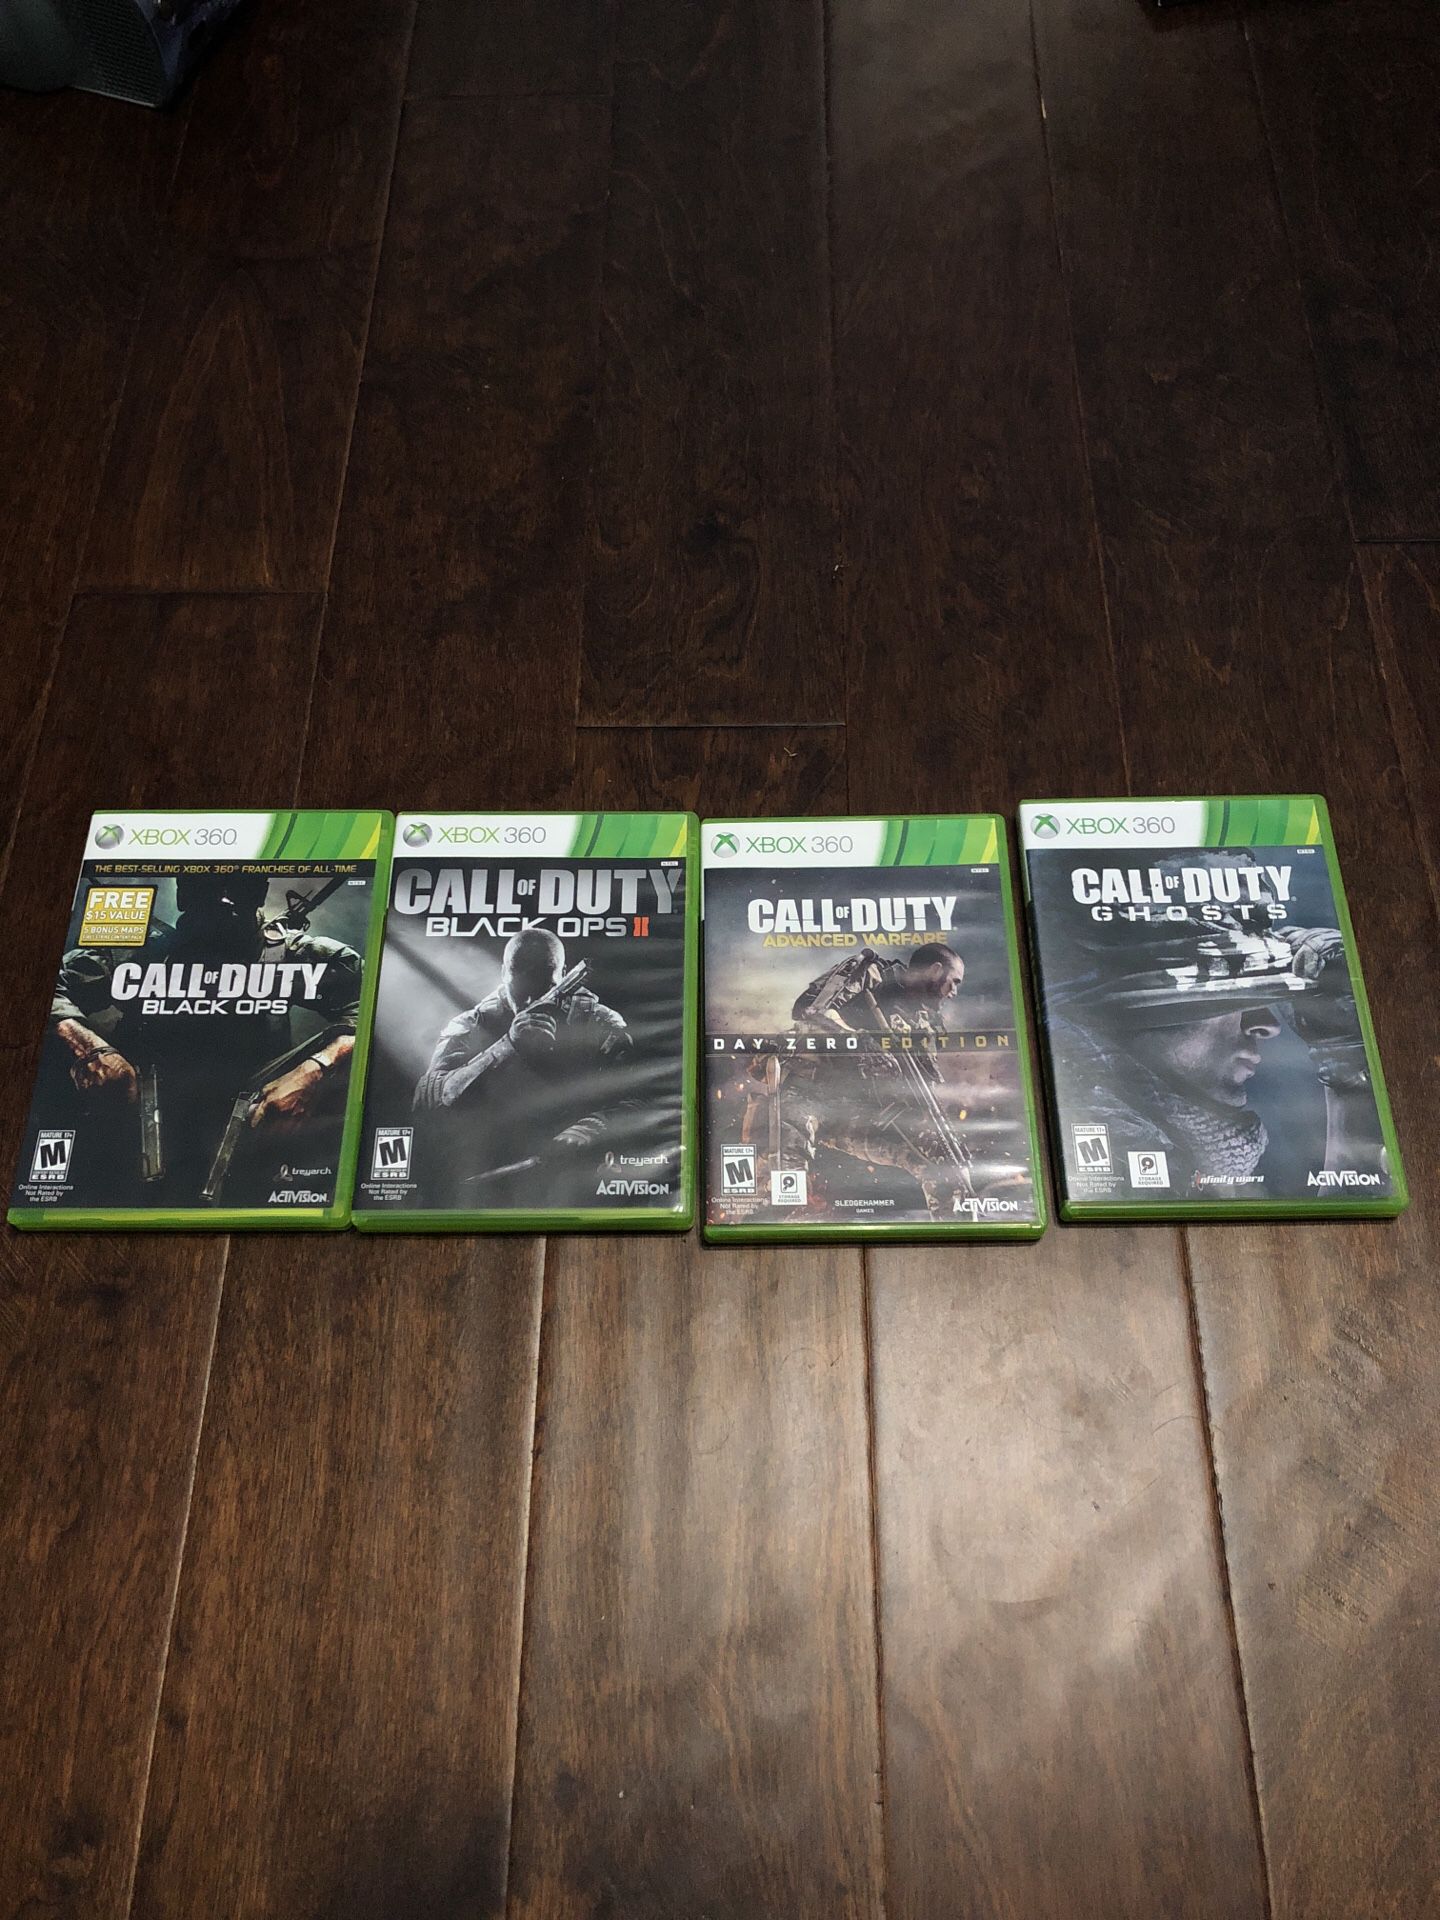 Xbox 360 call of duty games